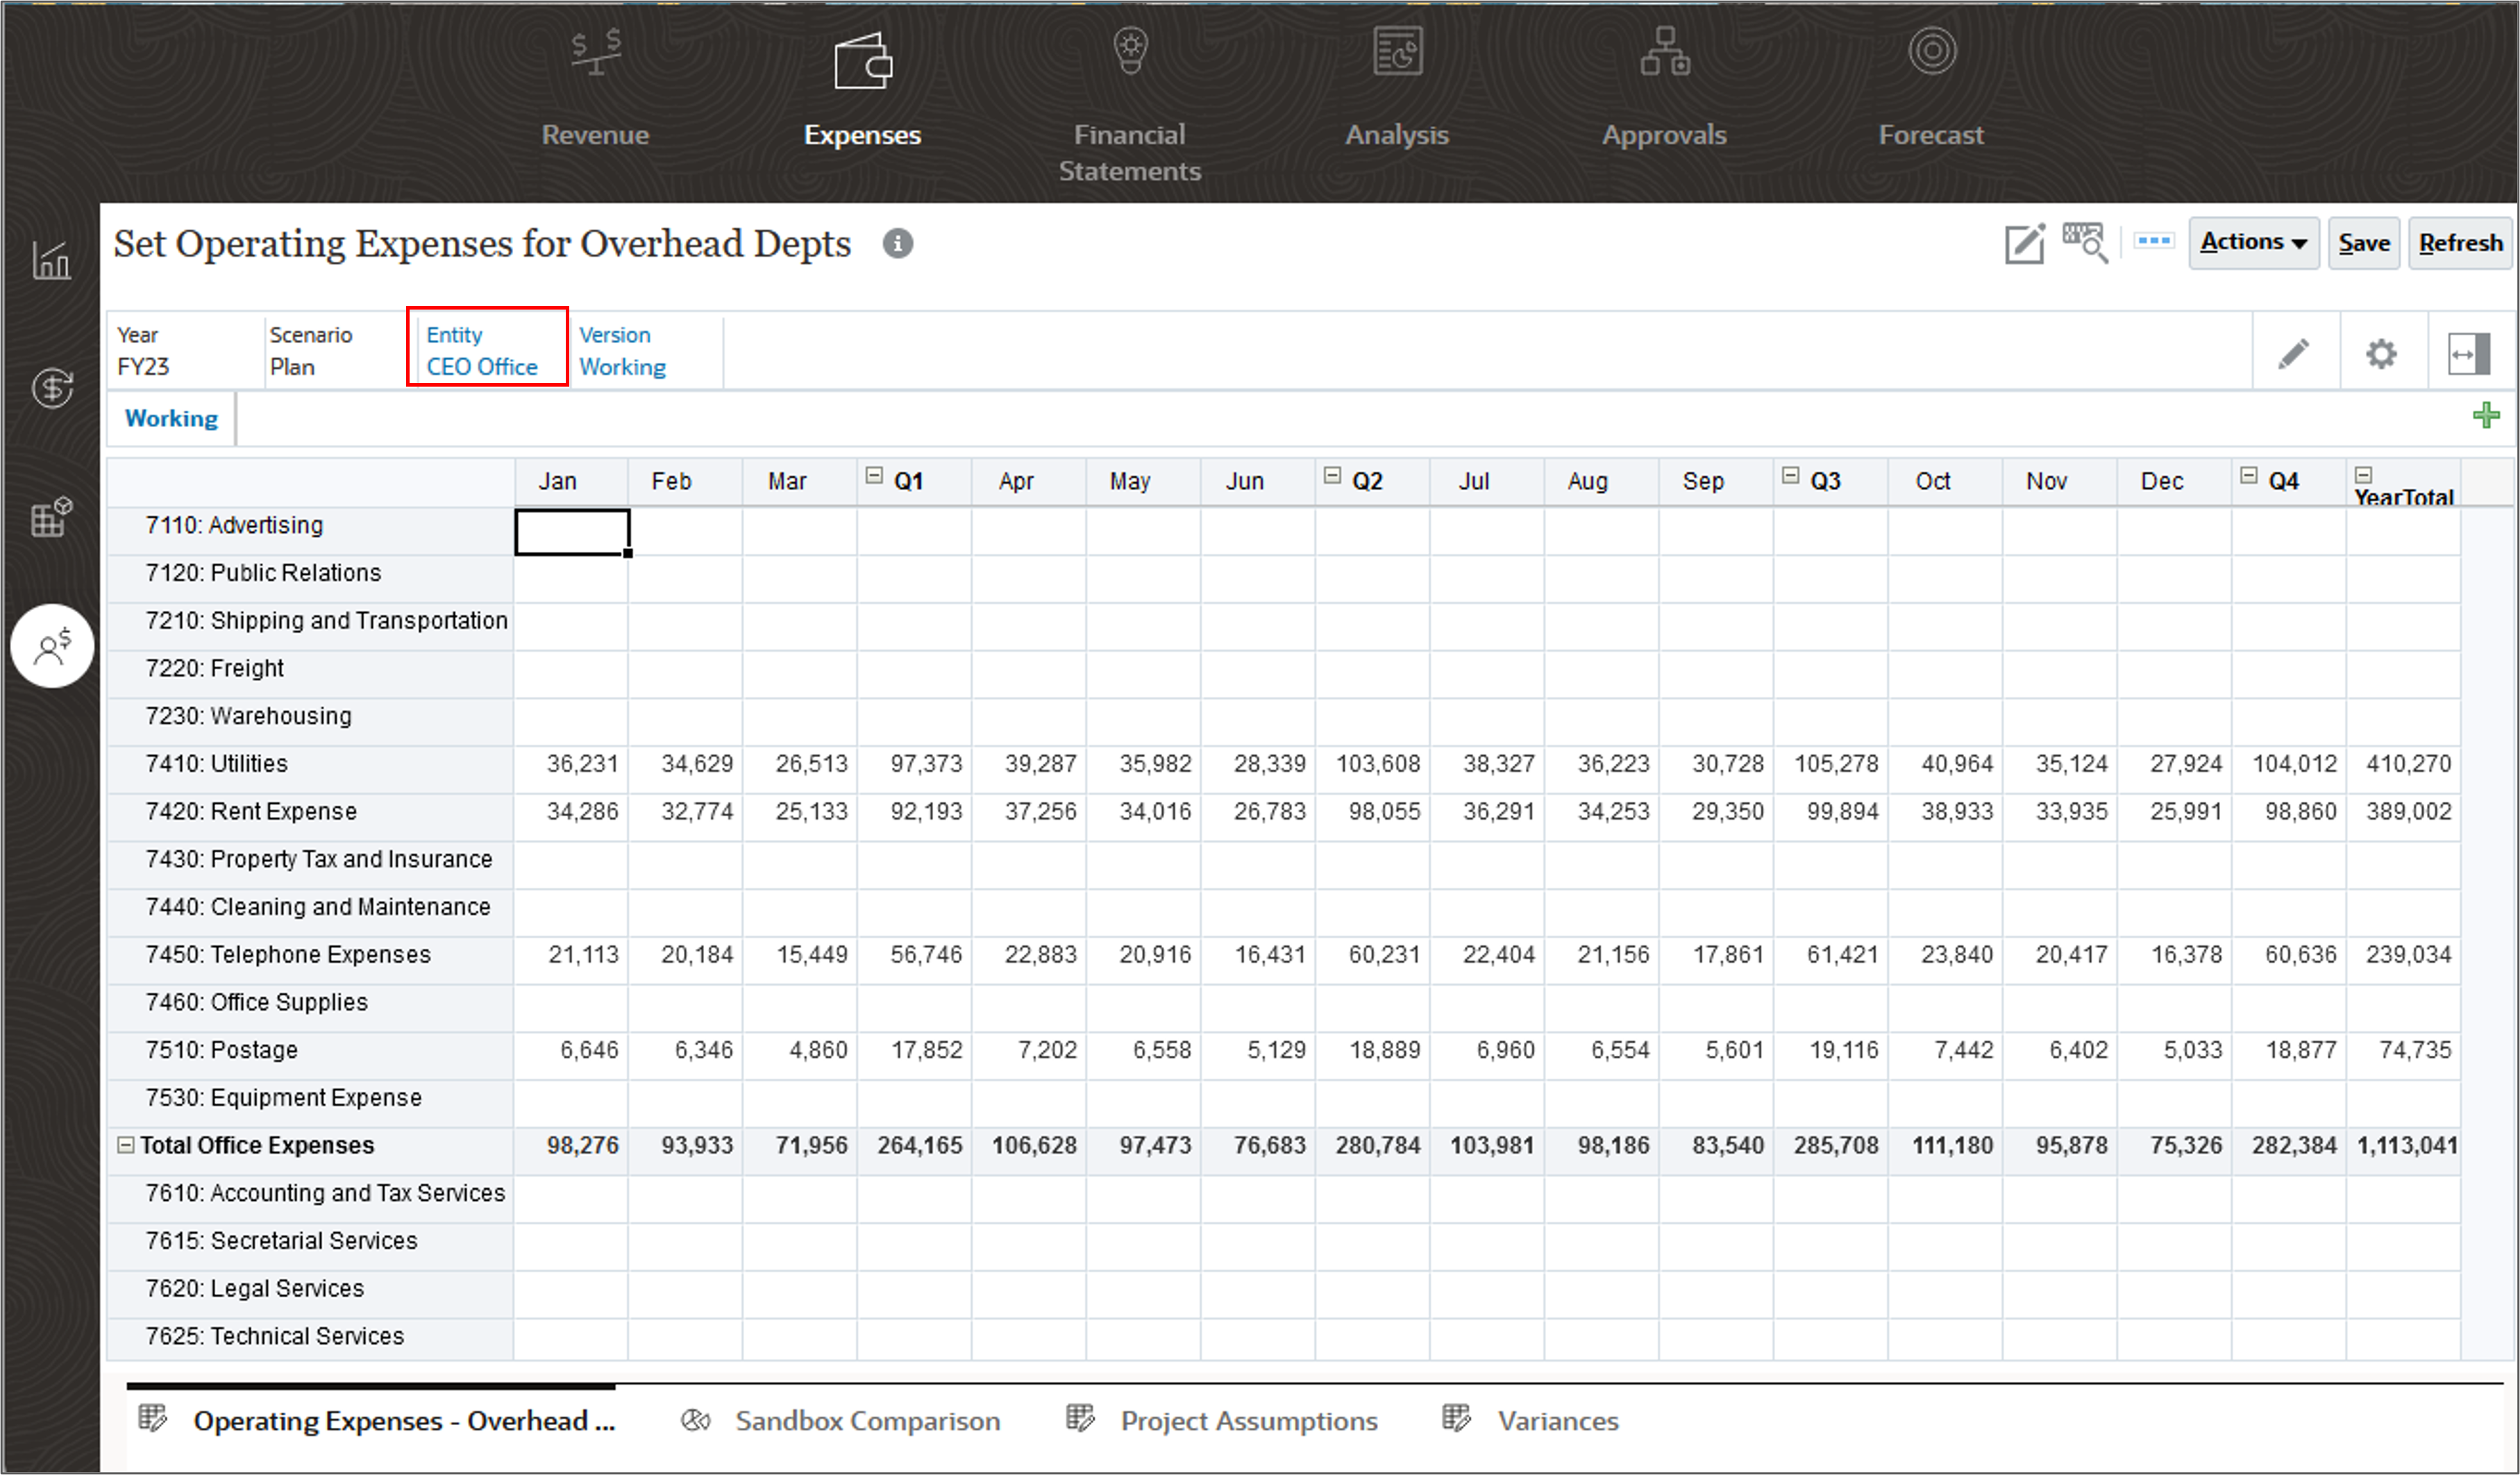 Set Operating Expenses for Overhead Depts Form with CEO Office